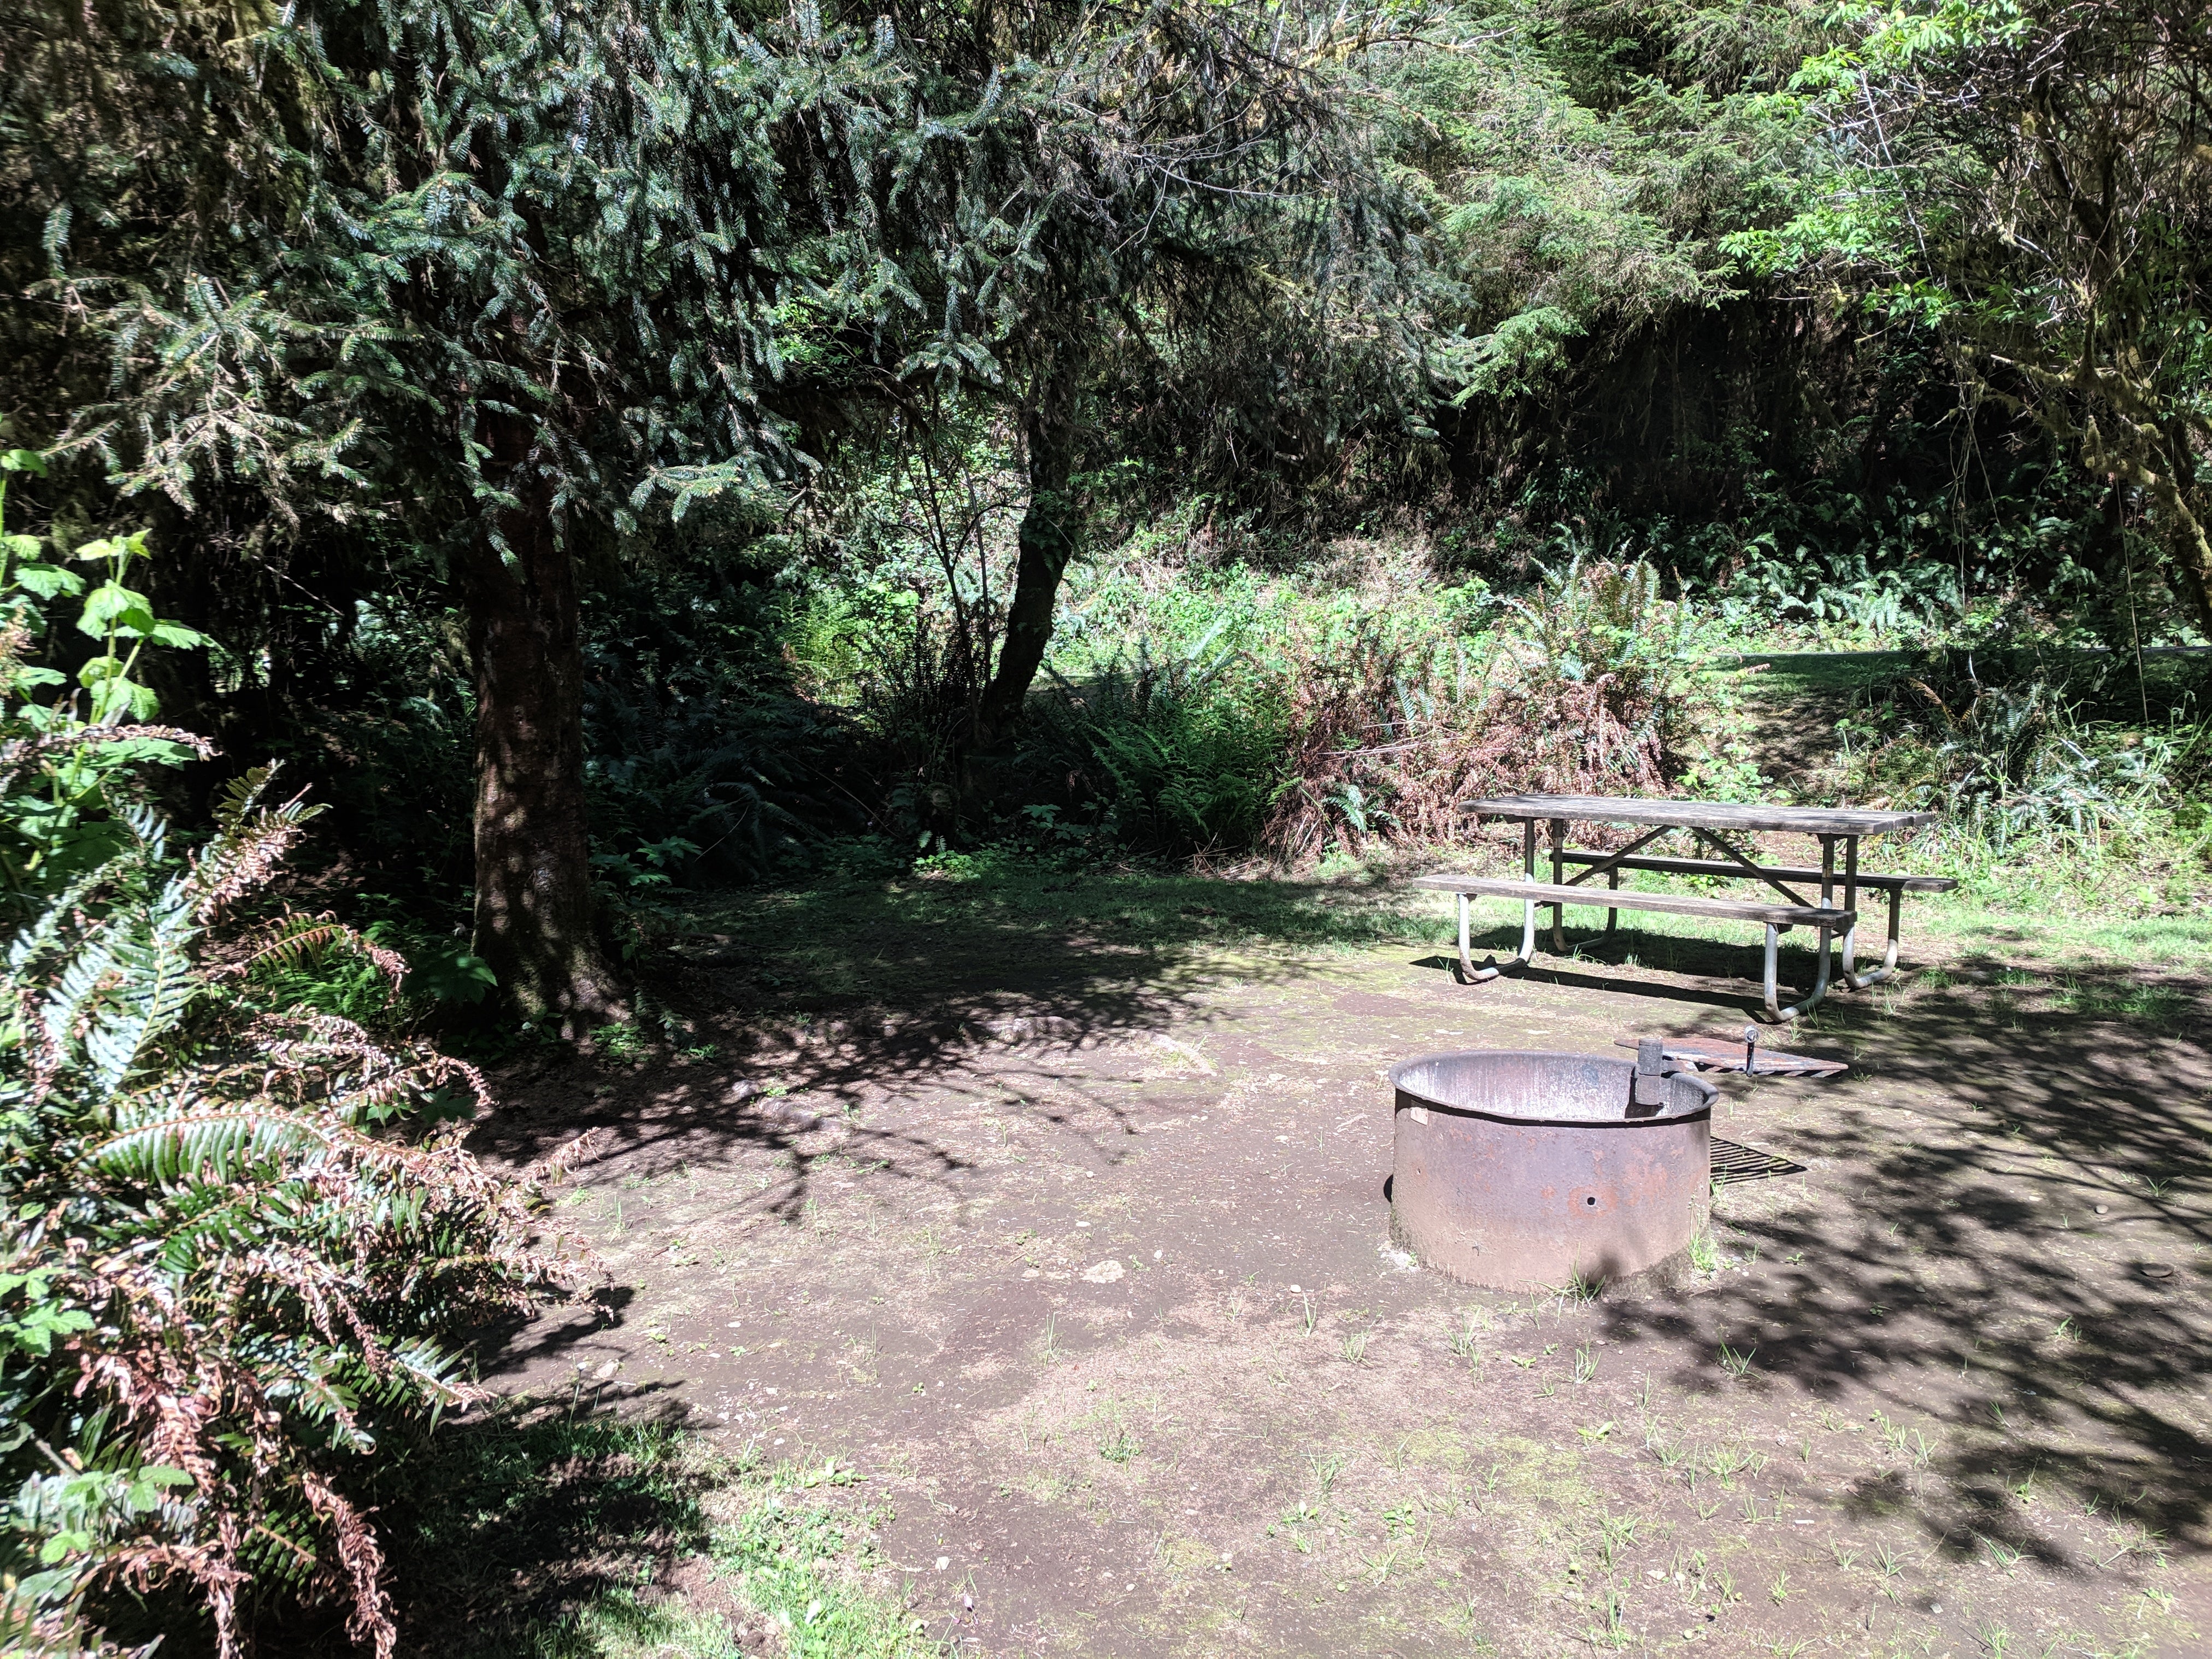 Another of the campsites at Cape Perpetua campground